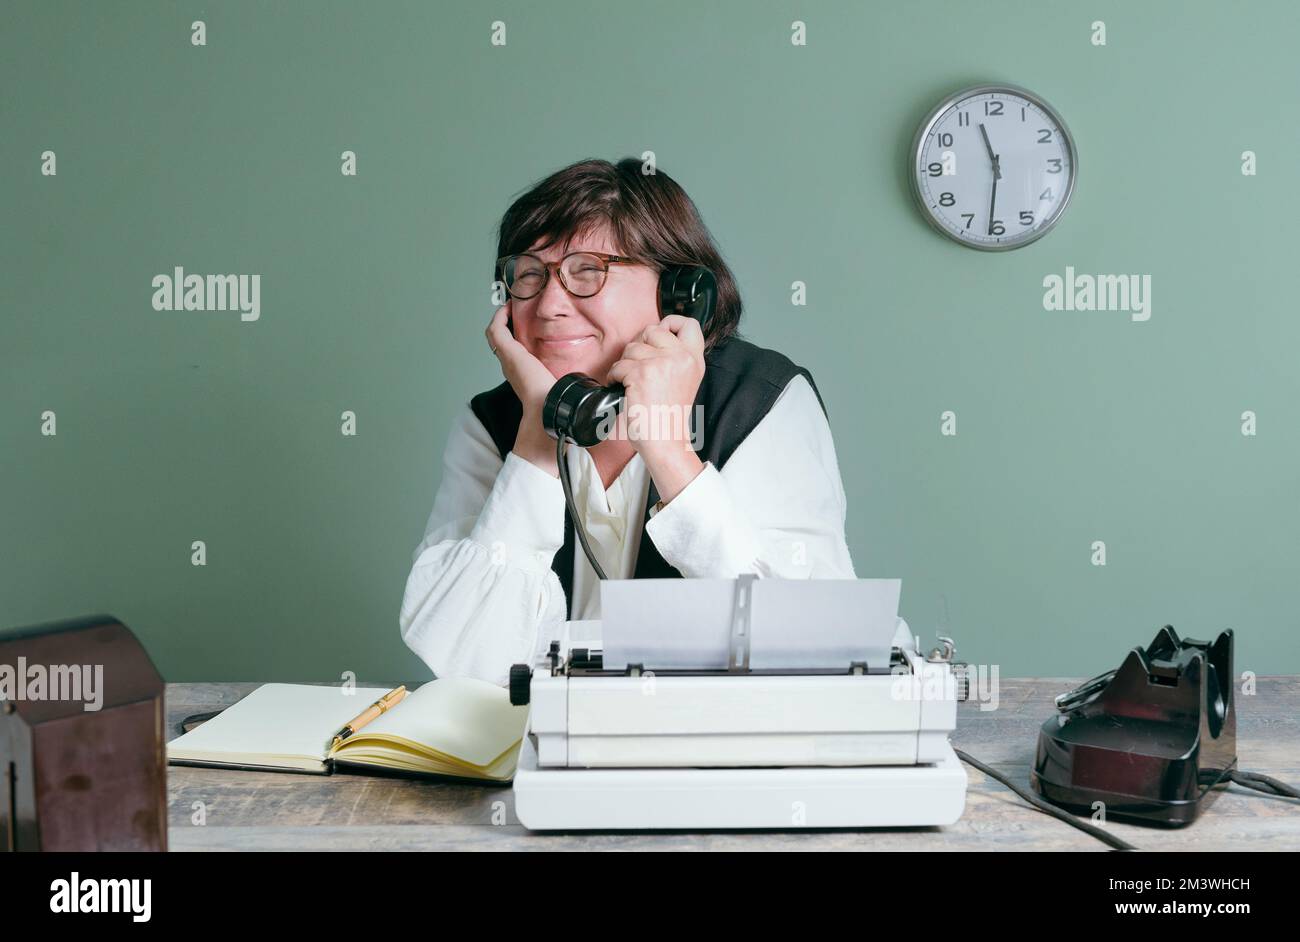 Talking on the phone while working. Secretary woman from the past Stock Photo